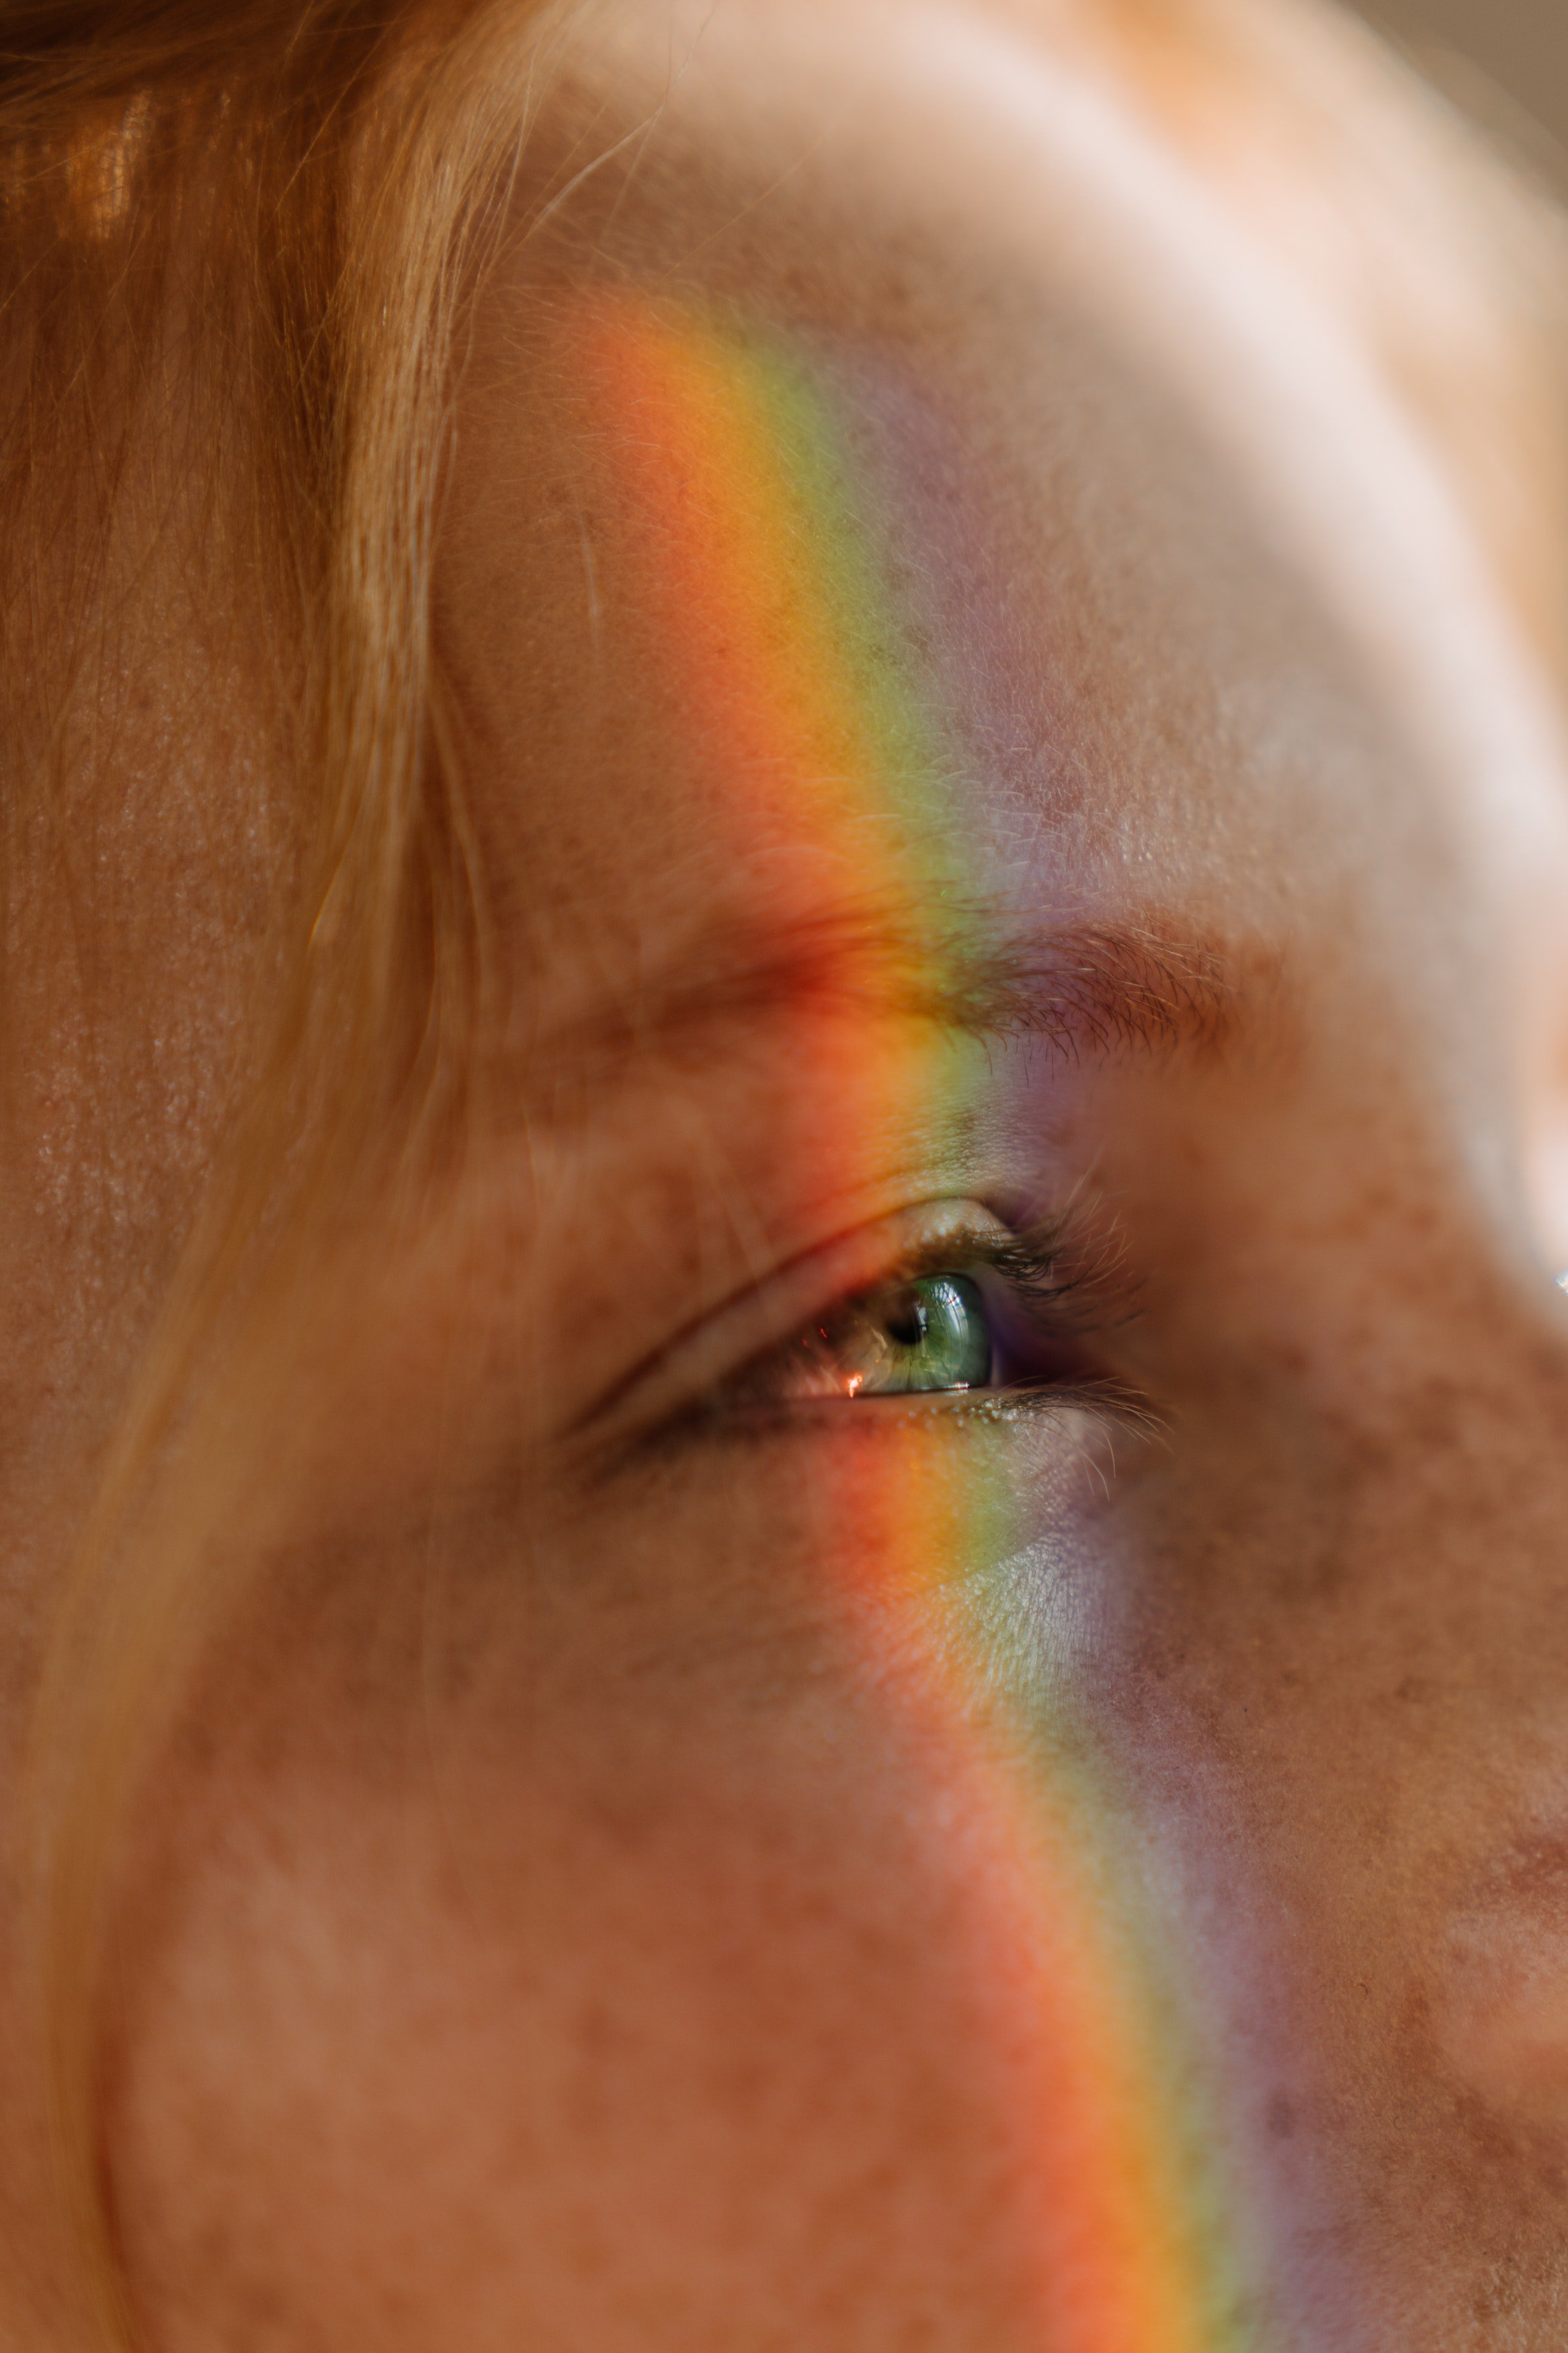 Lily and Mrs. Carson saw the most beautiful rainbow. | Source: Pexels